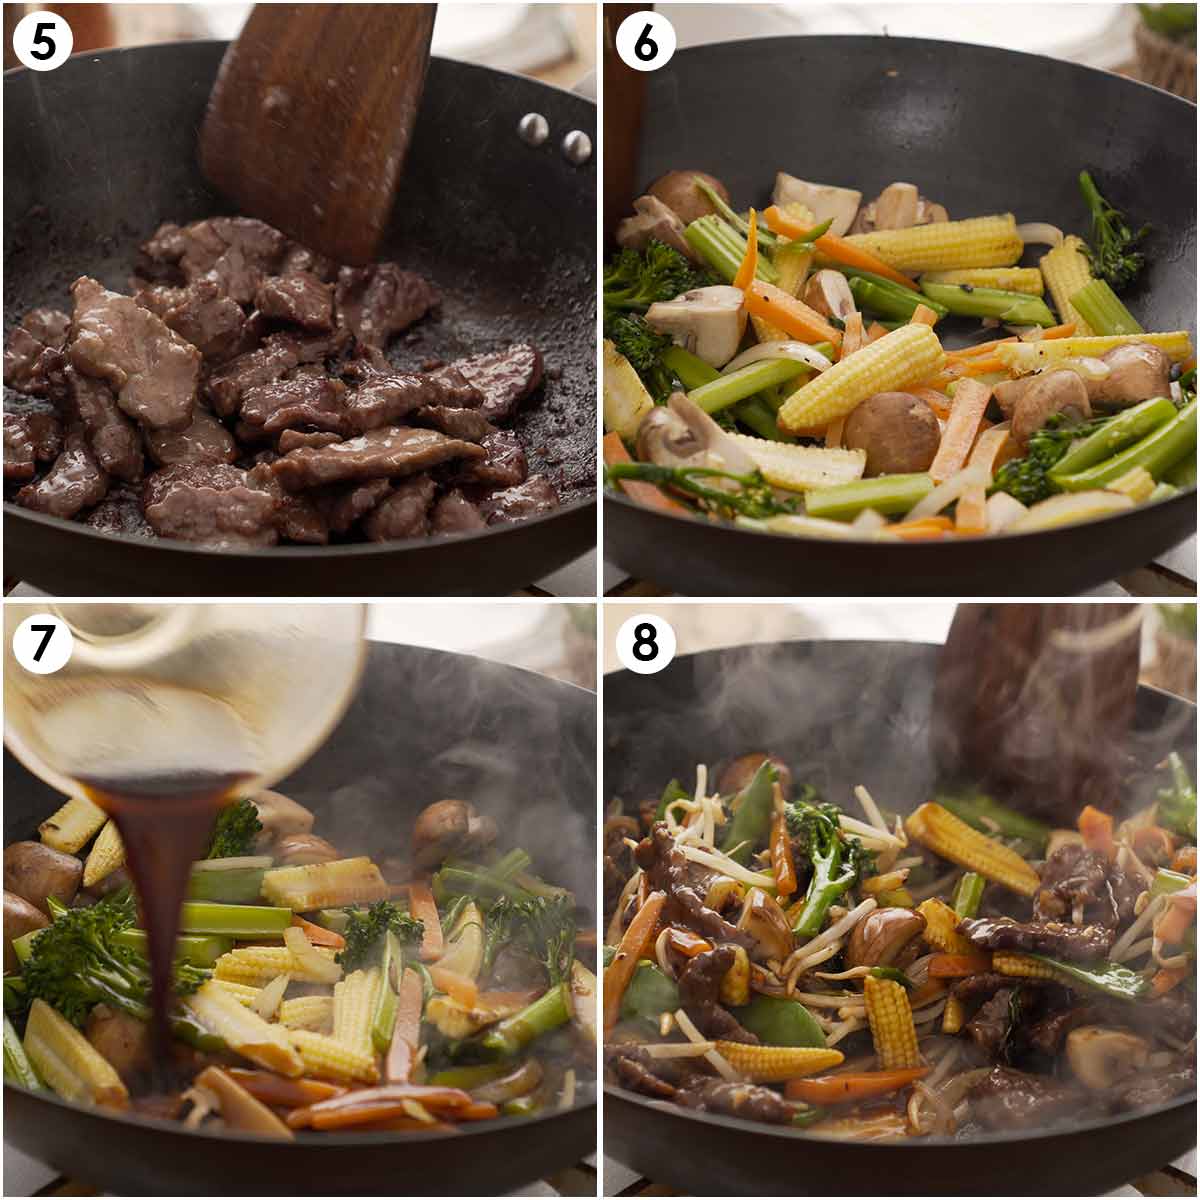 4 image collage showing how to stir fry beef and vegetables with sauce.